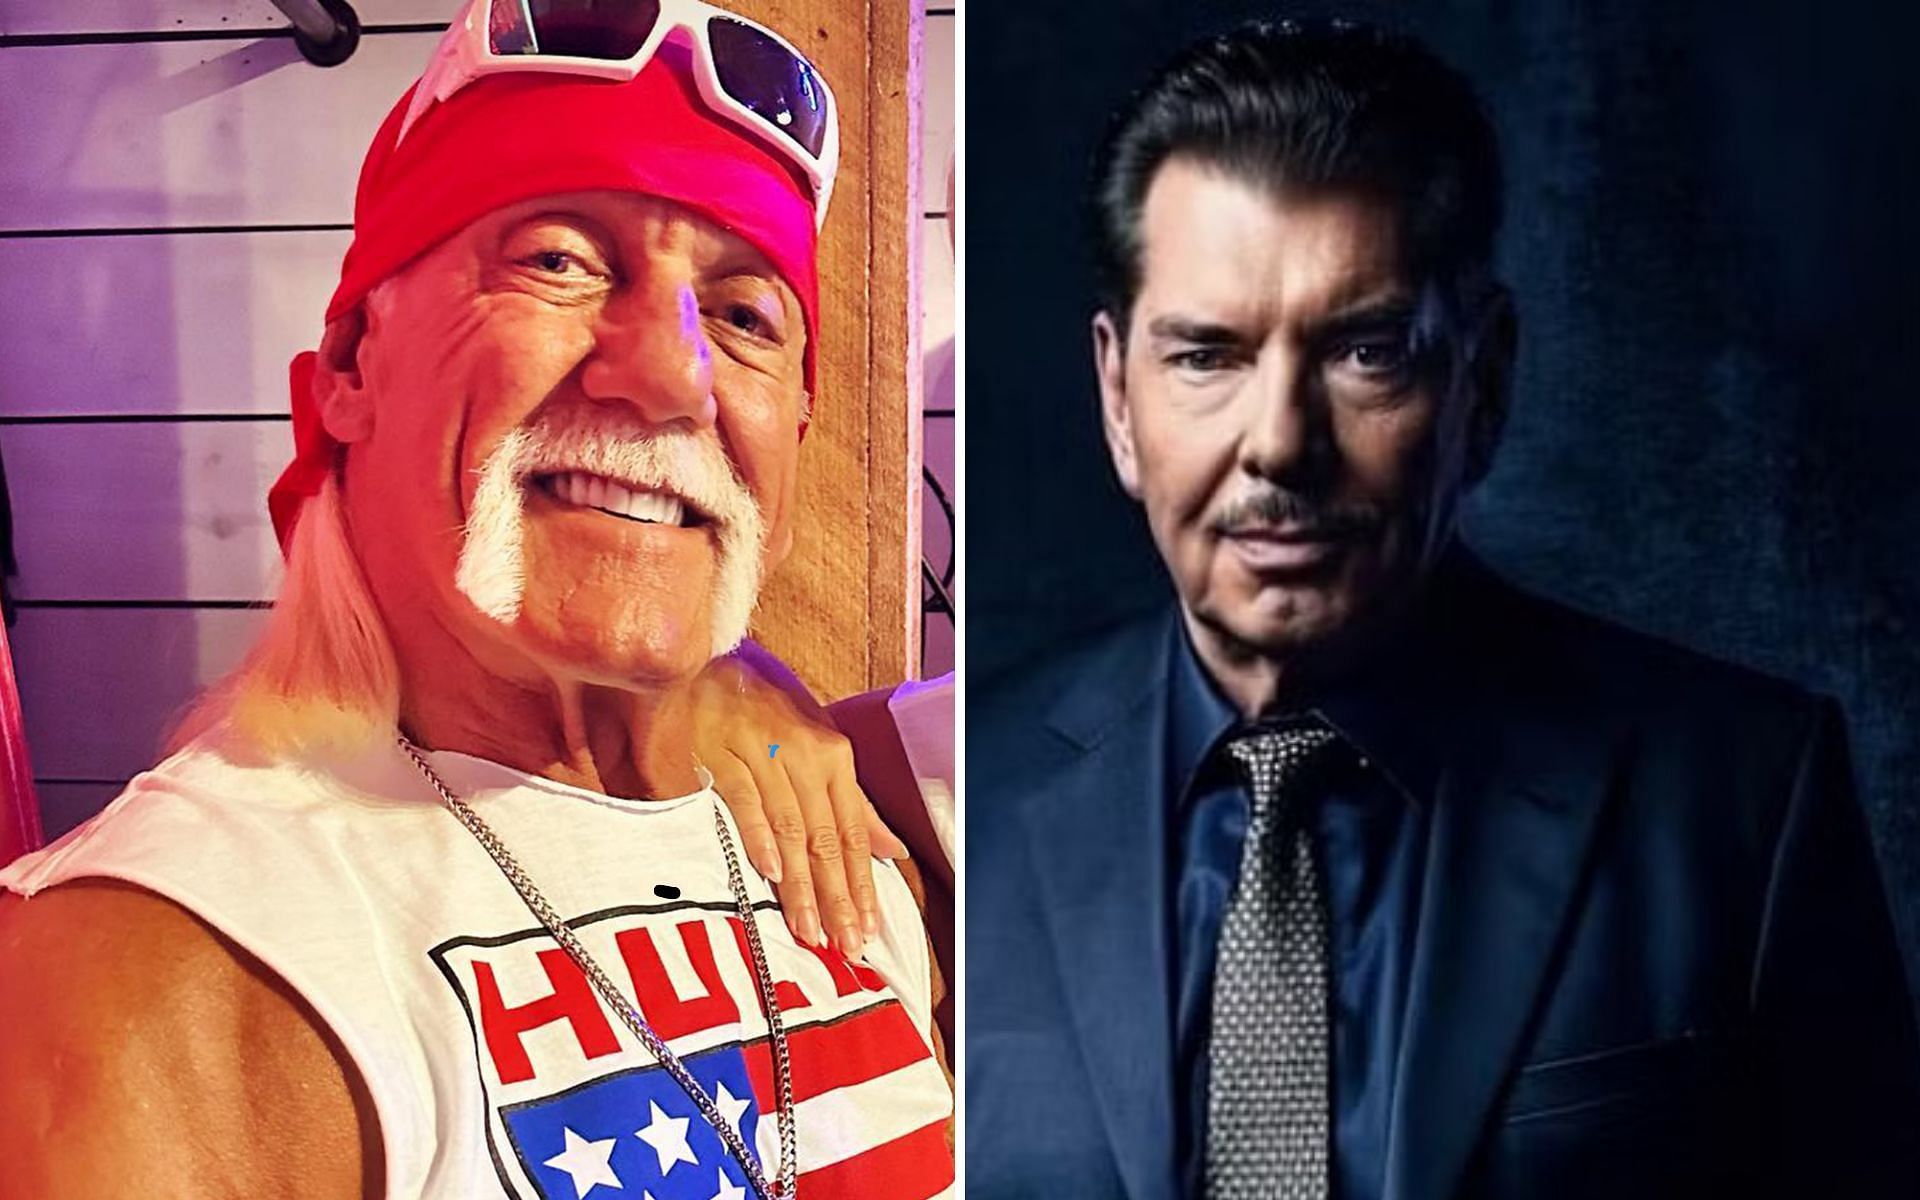 The Hulkster thinks another legend should have followed his footsteps